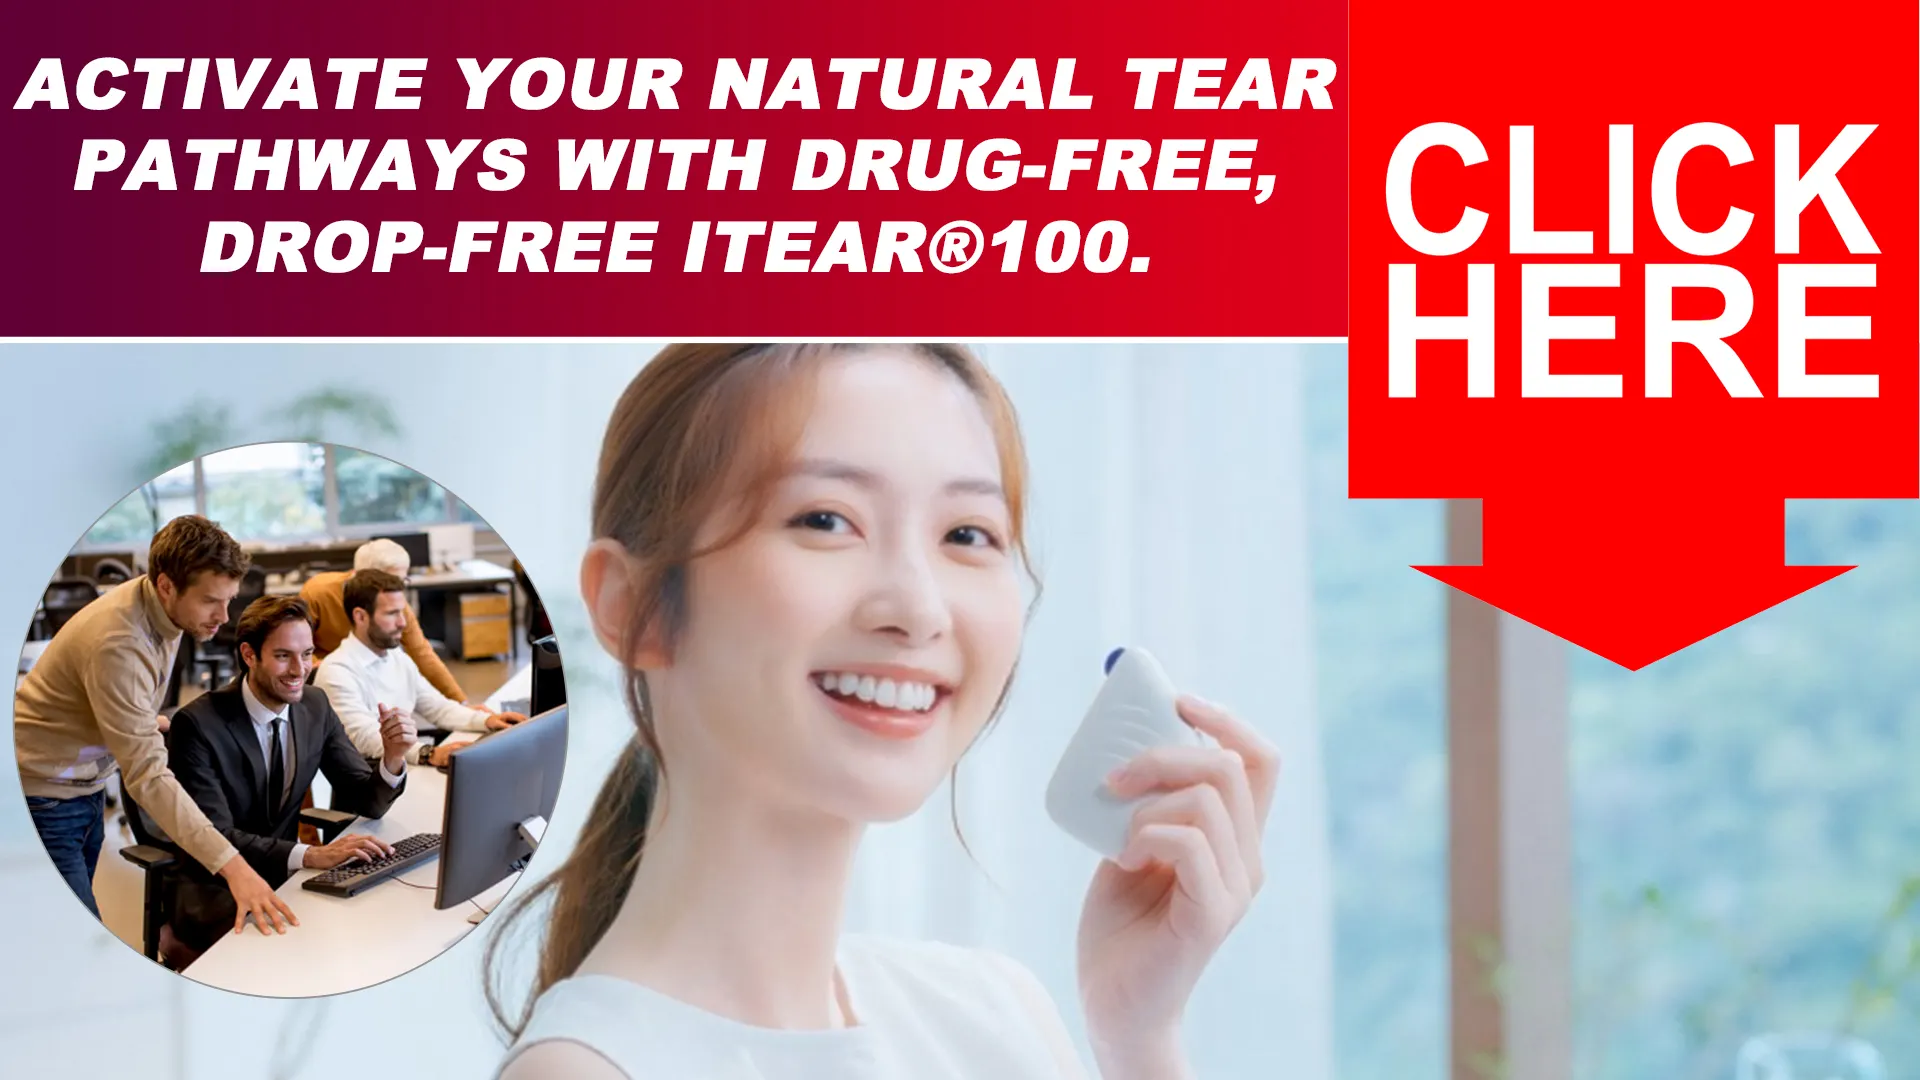 The Allure of iTEAR100: Easy as 1, 2, Tears!